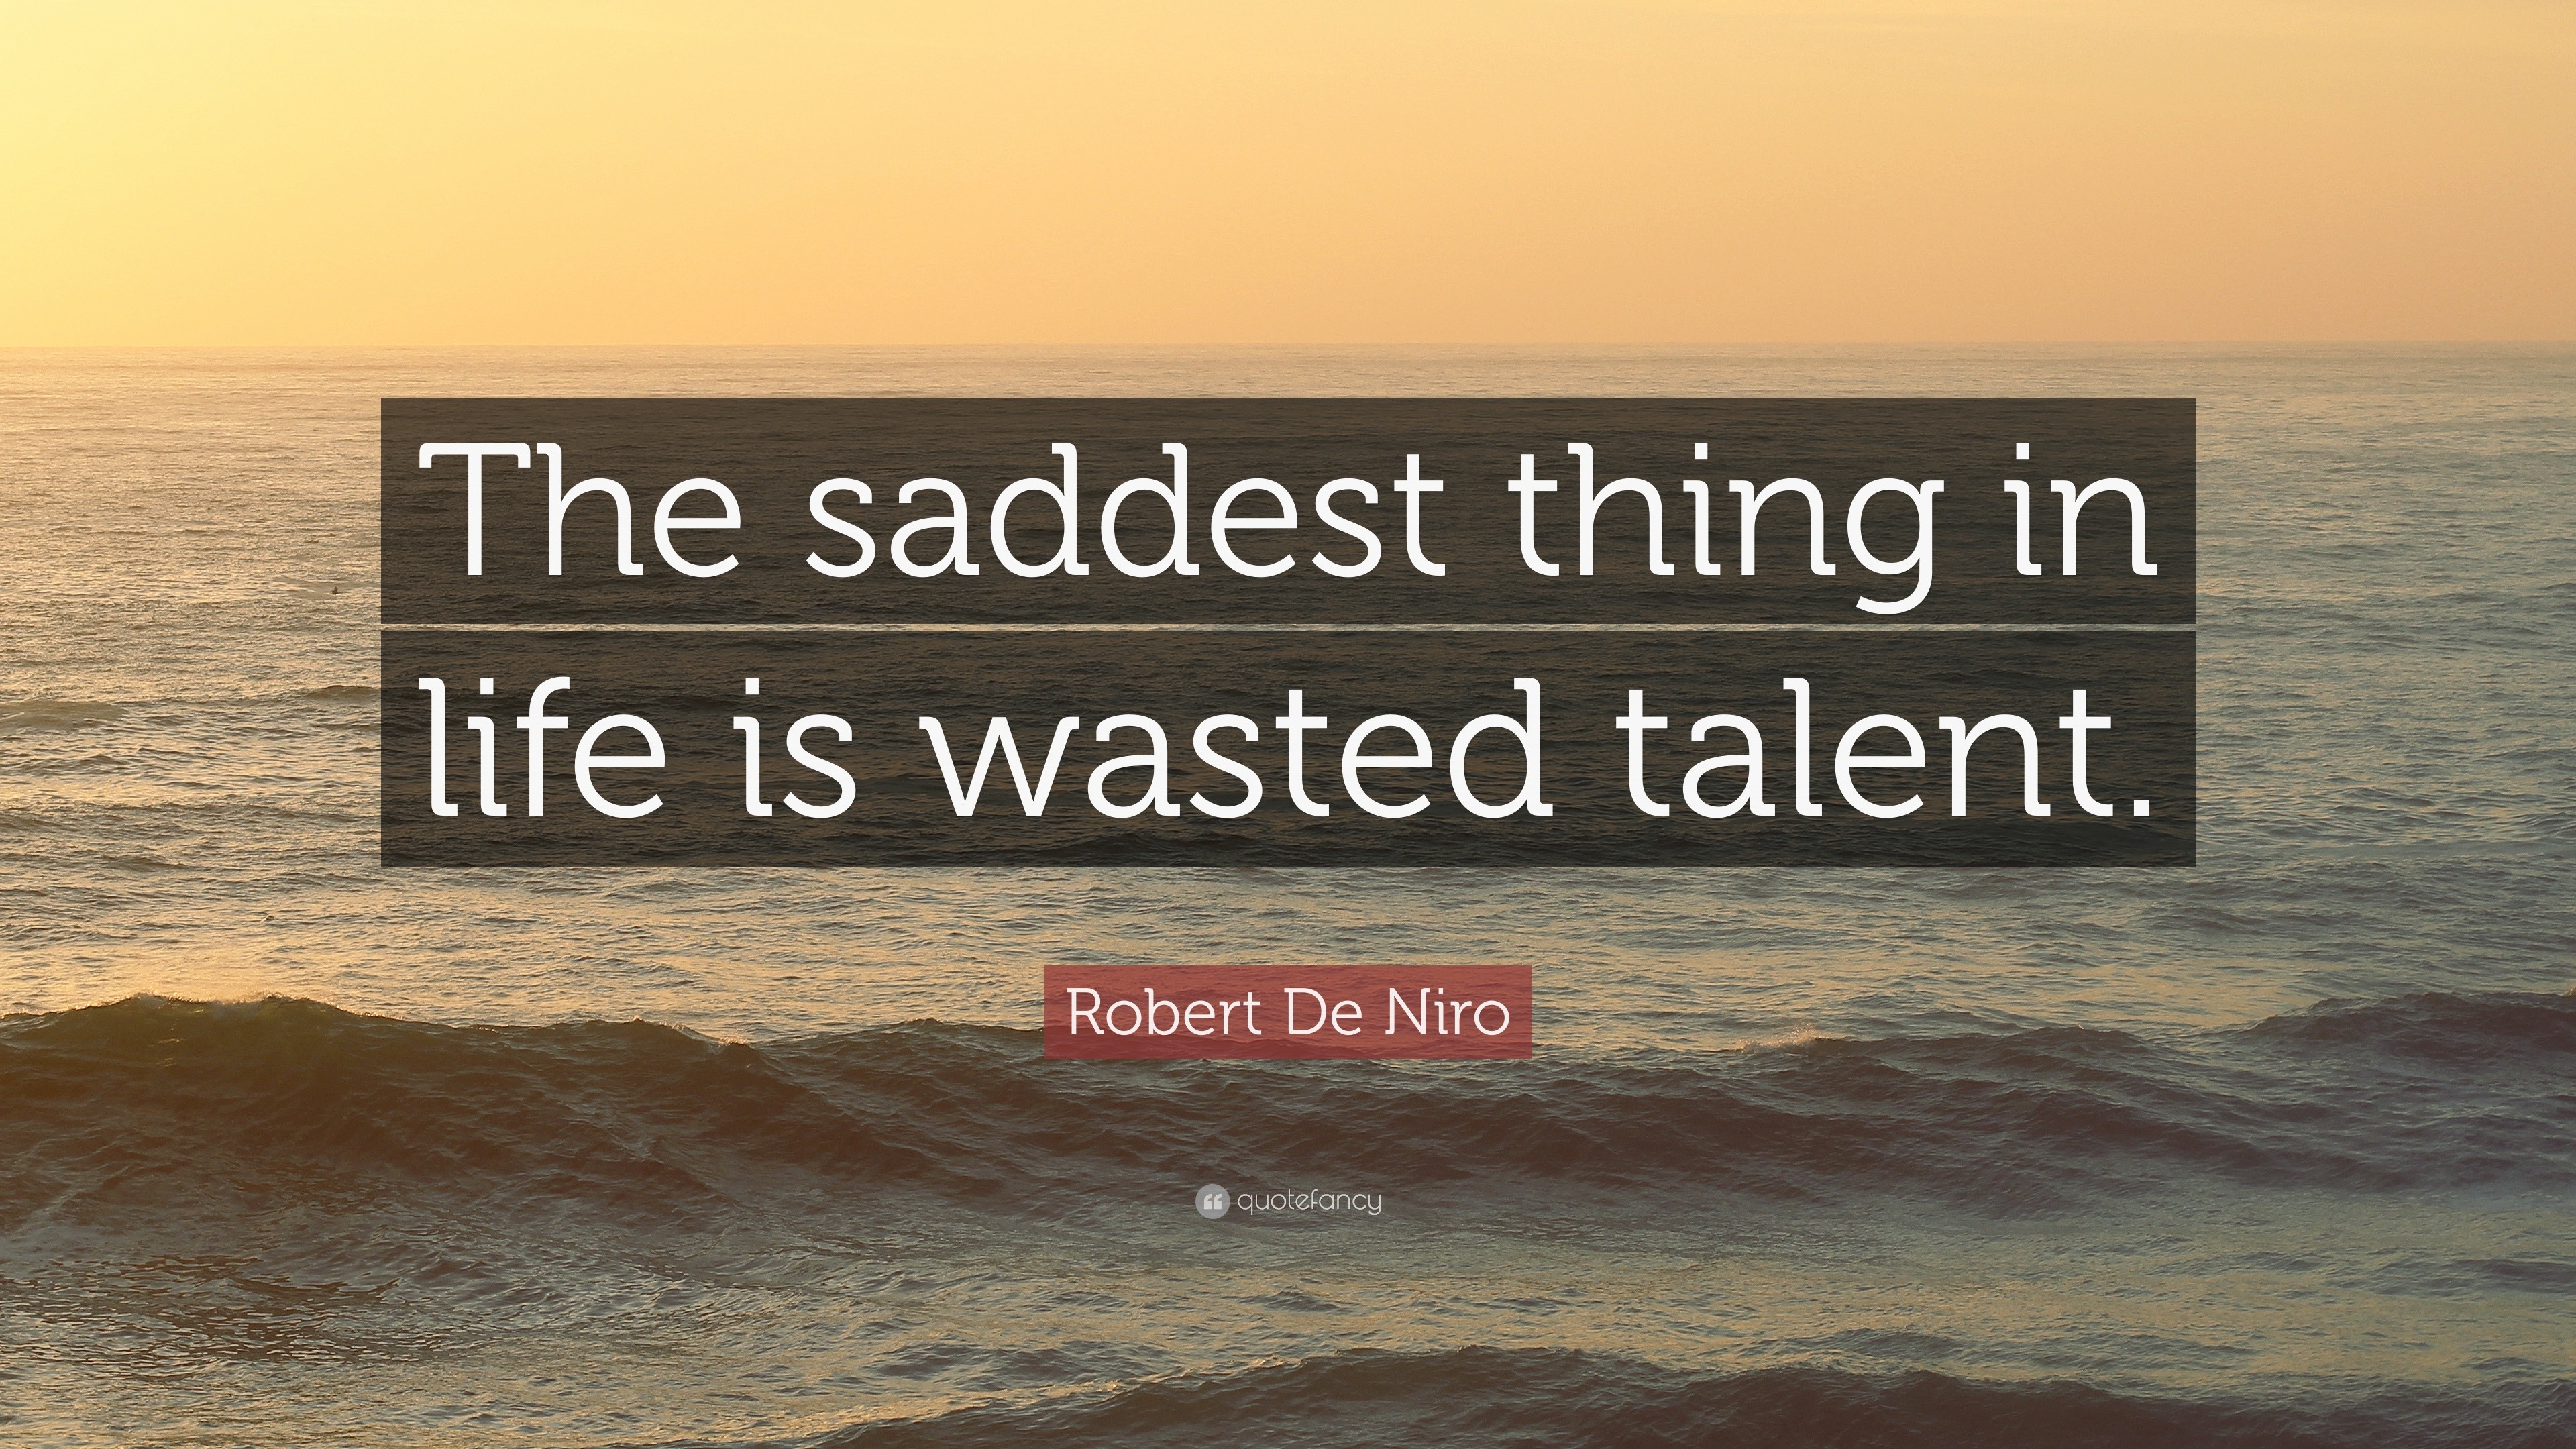 Robert De Niro Quote “The saddest thing in life is wasted talent.”